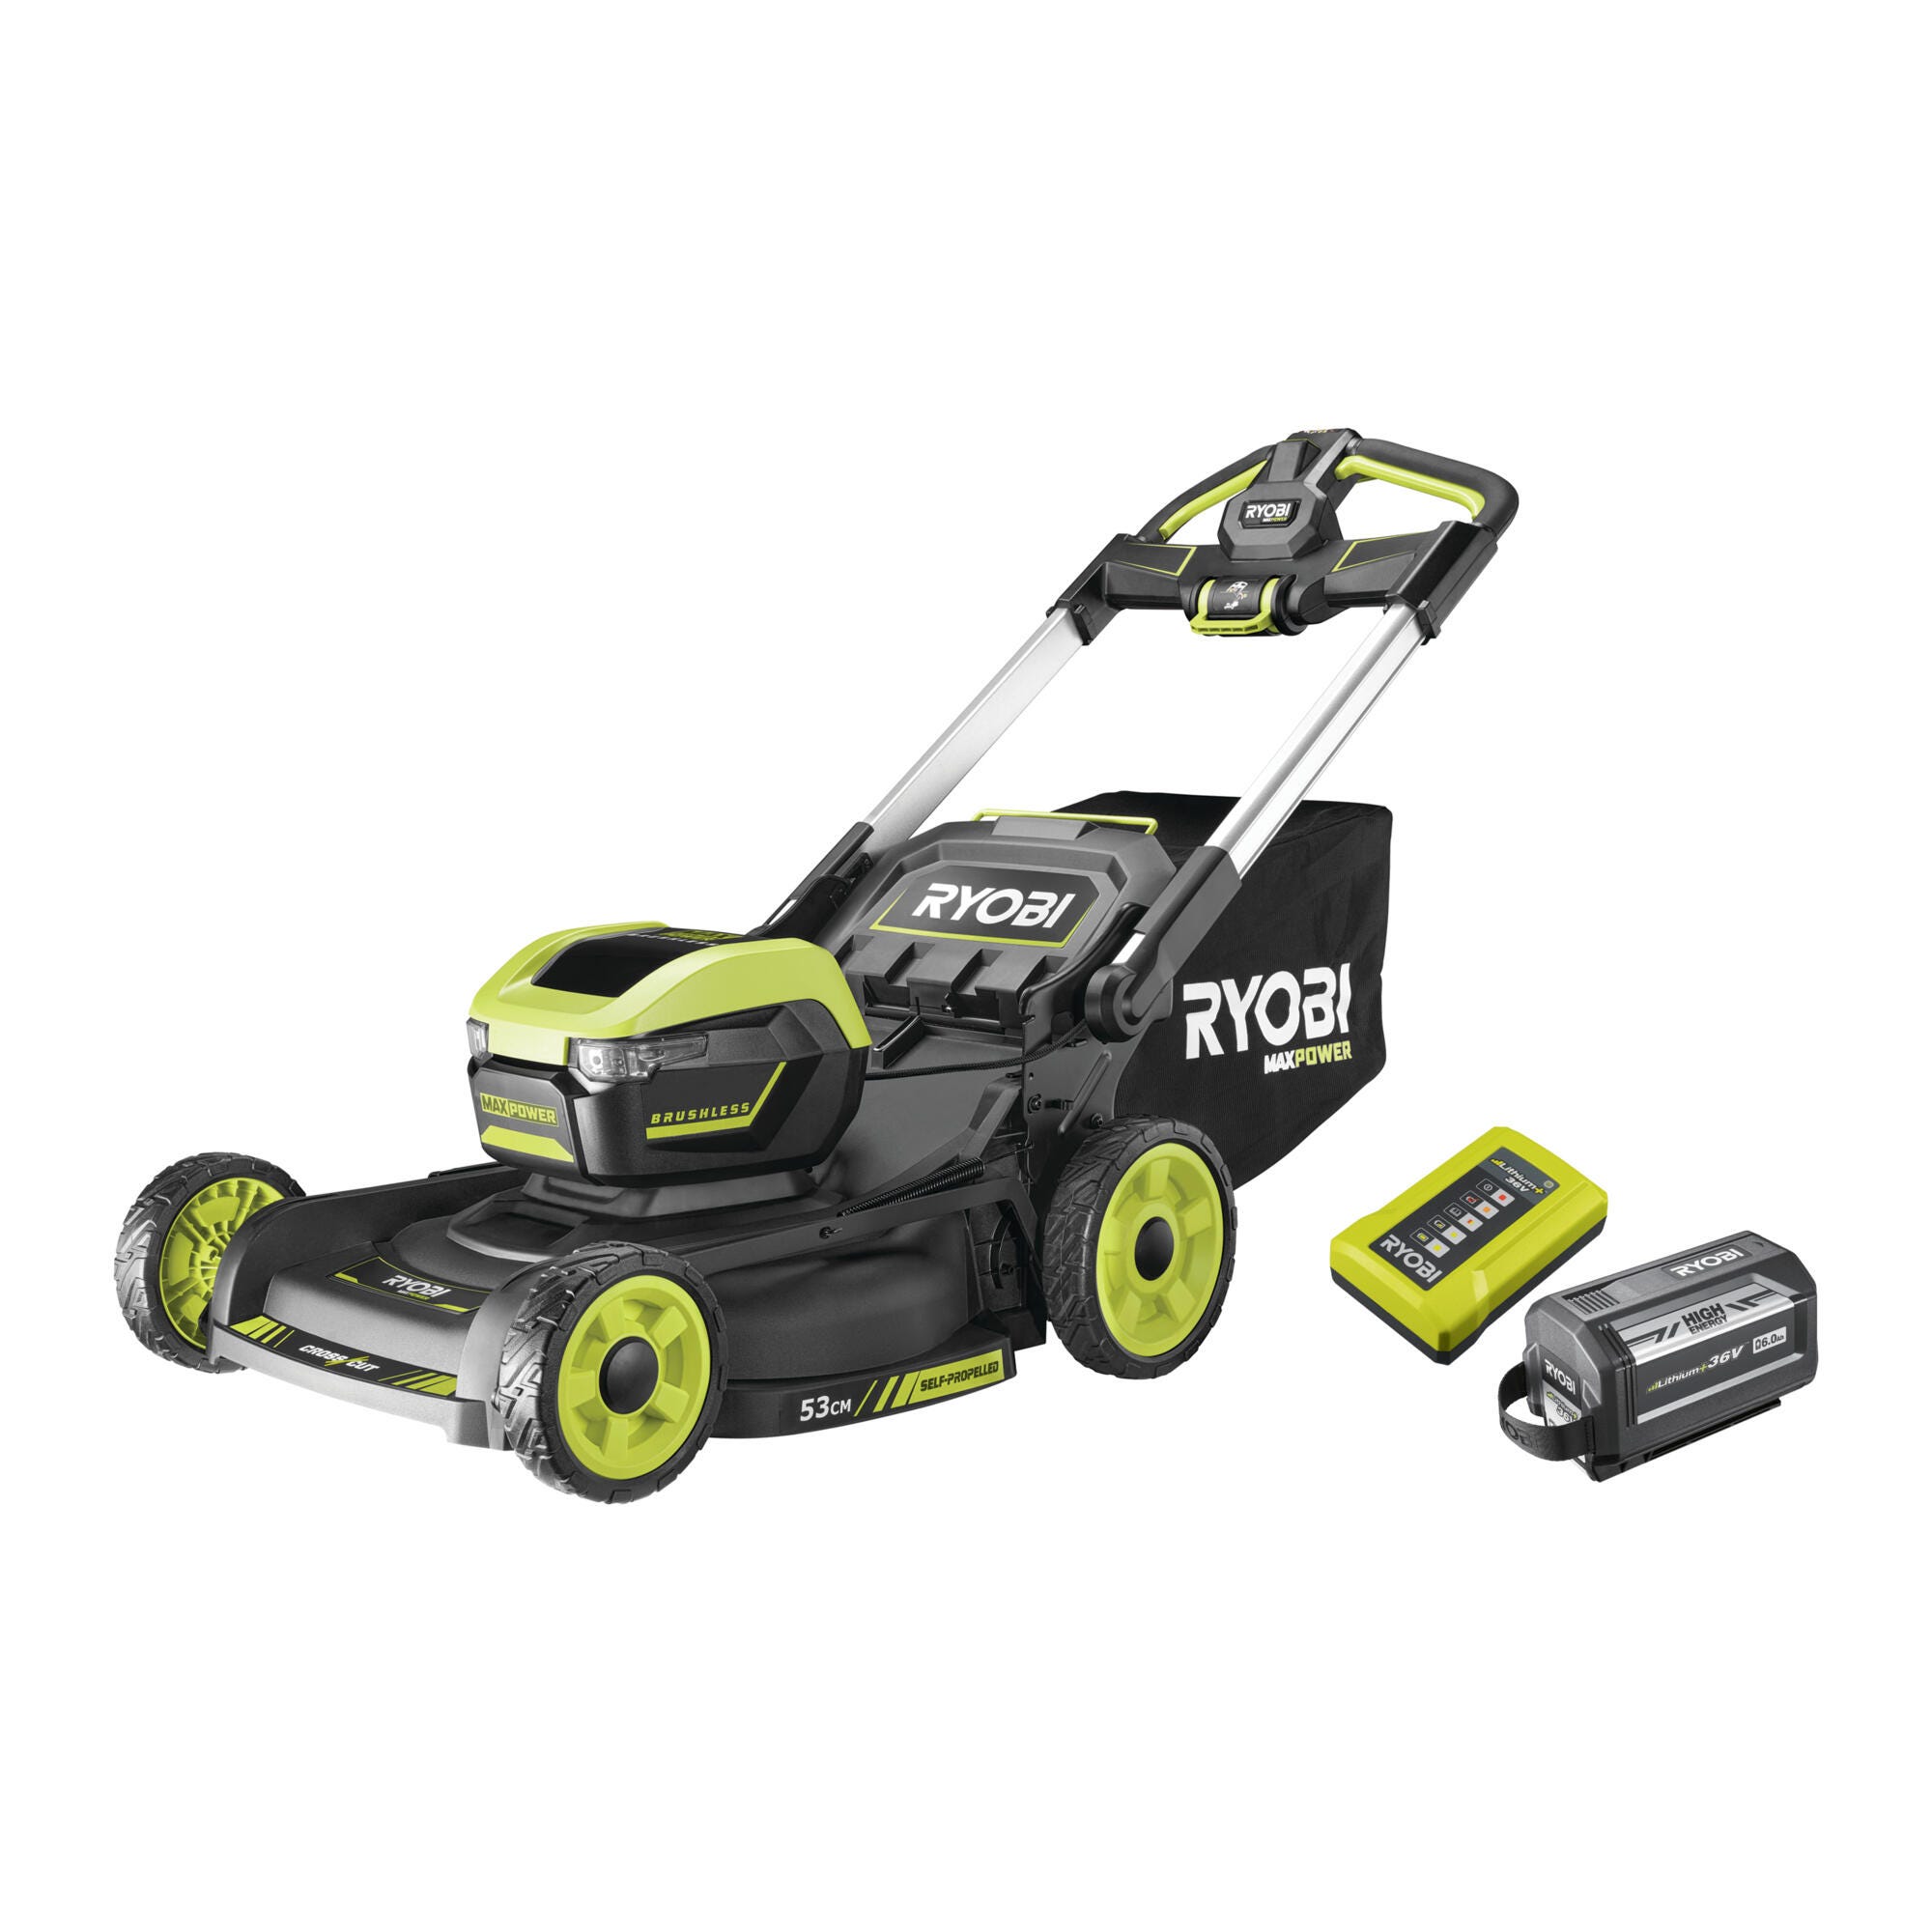 Tondeuse RYOBI 18V OnePlus Brushless - coupe 40 cm - 2 Batteries 4.0Ah - 1  Chargeur - RY18LMX40A-240 - Espace Bricolage